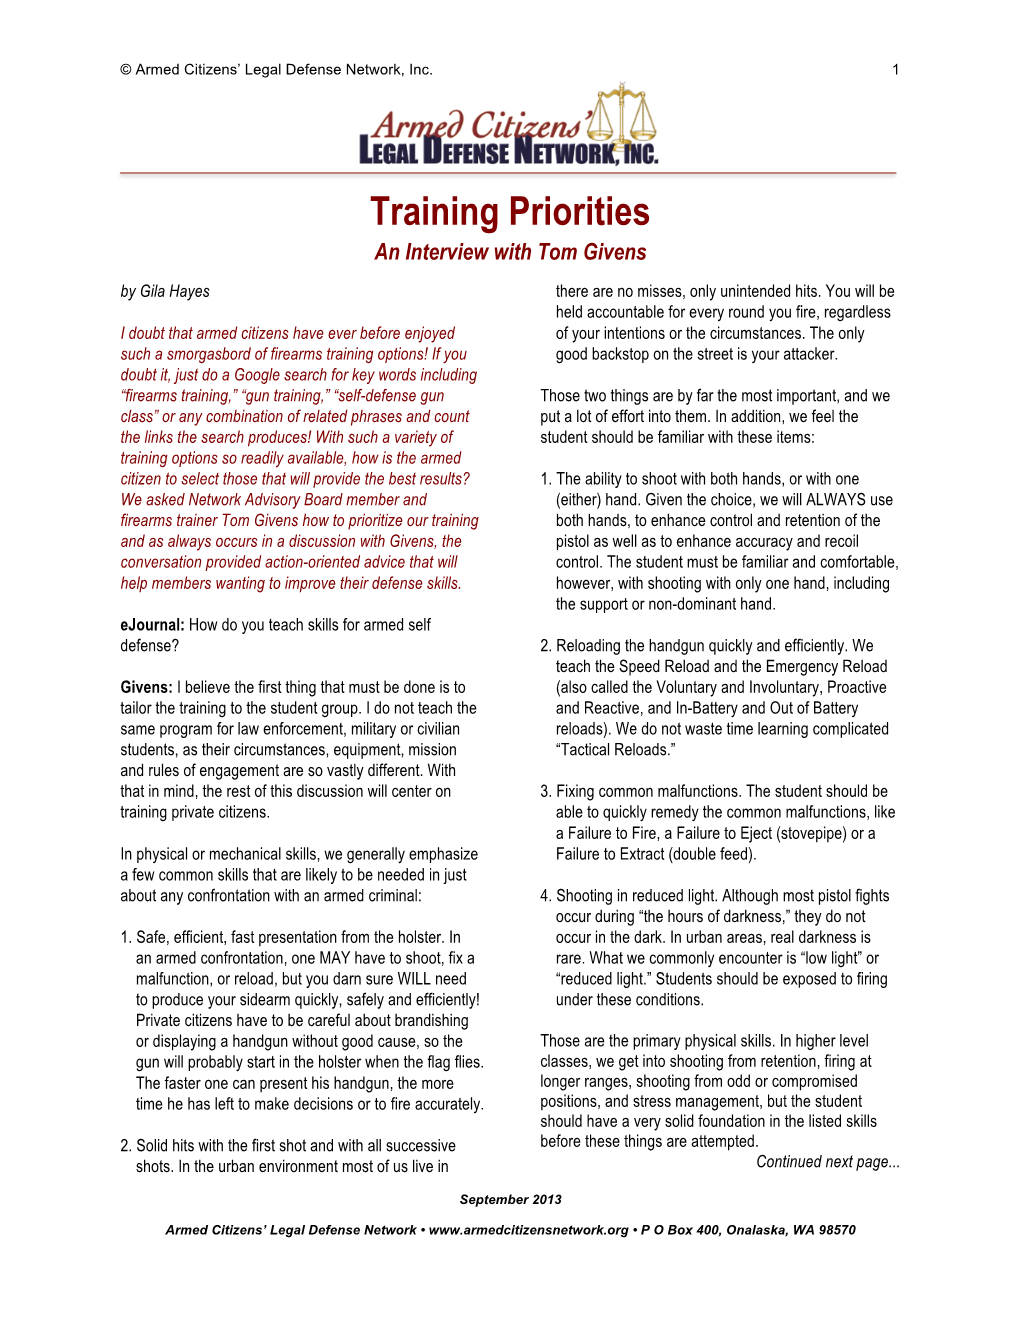 Training Priorities an Interview with Tom Givens by Gila Hayes There Are No Misses, Only Unintended Hits